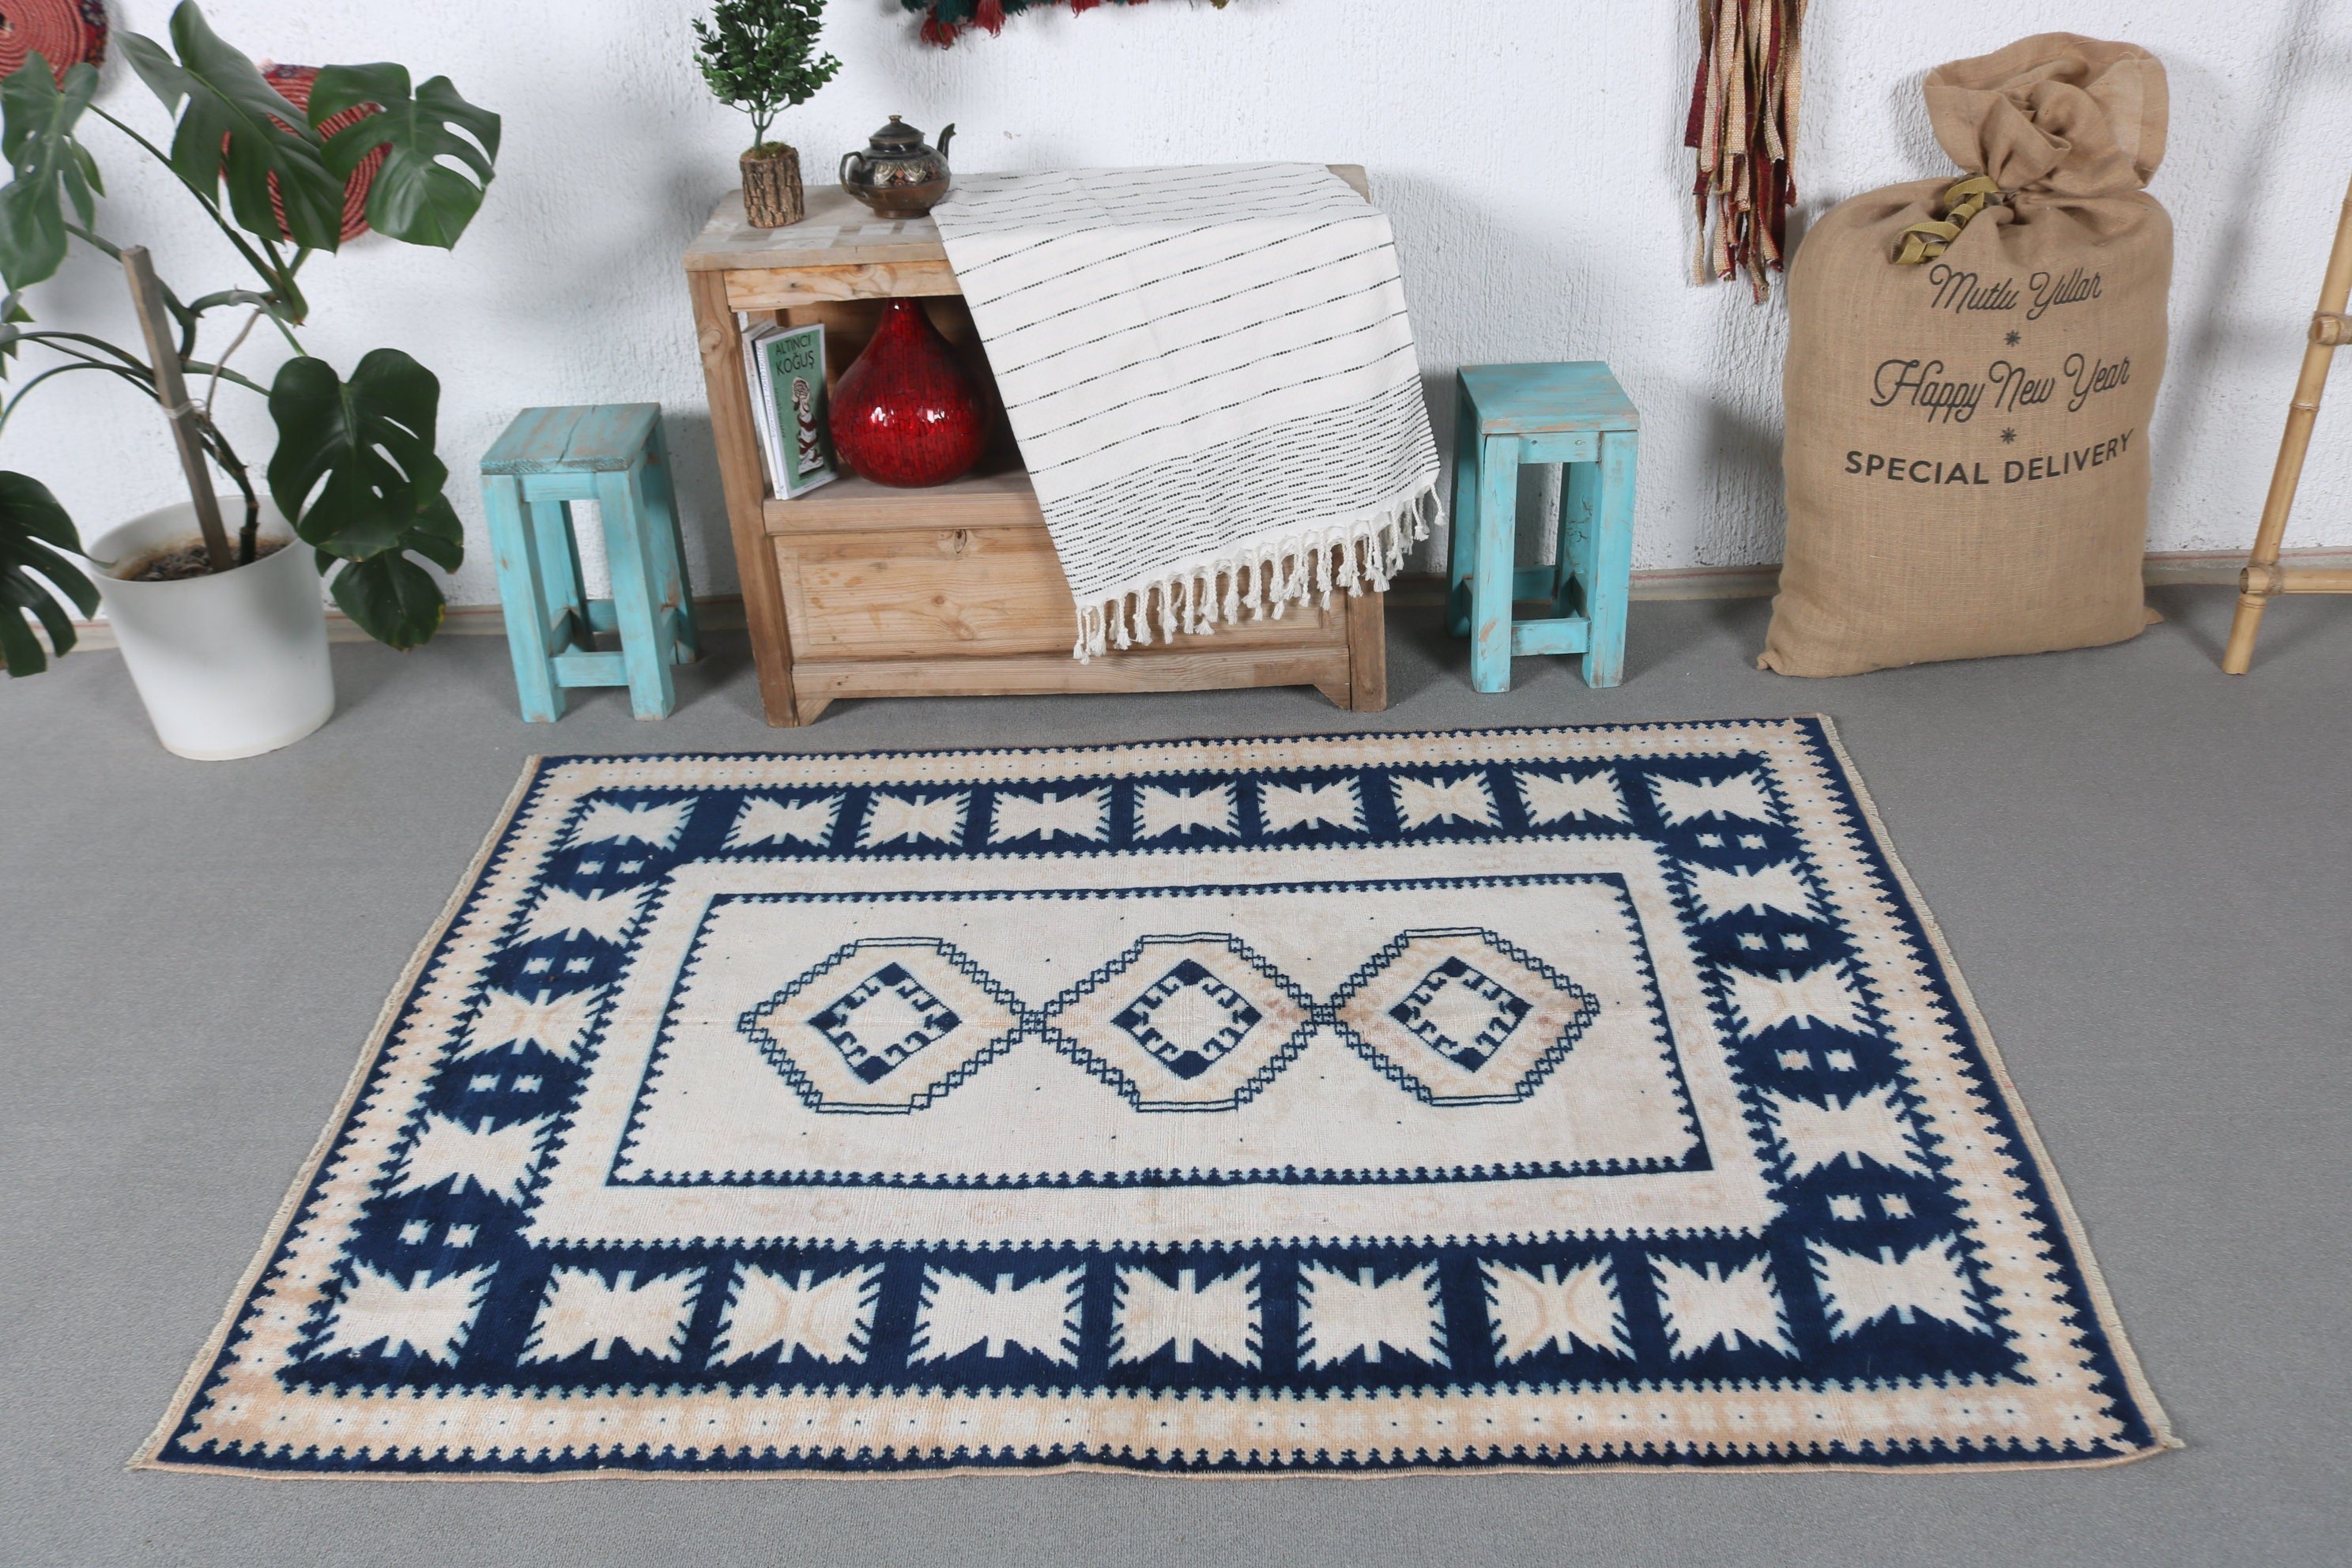 Turkish Rug, Vintage Rugs, Rugs for Entry, Entry Rug, Blue  3.8x5.4 ft Accent Rugs, Wool Rugs, Nursery Rug